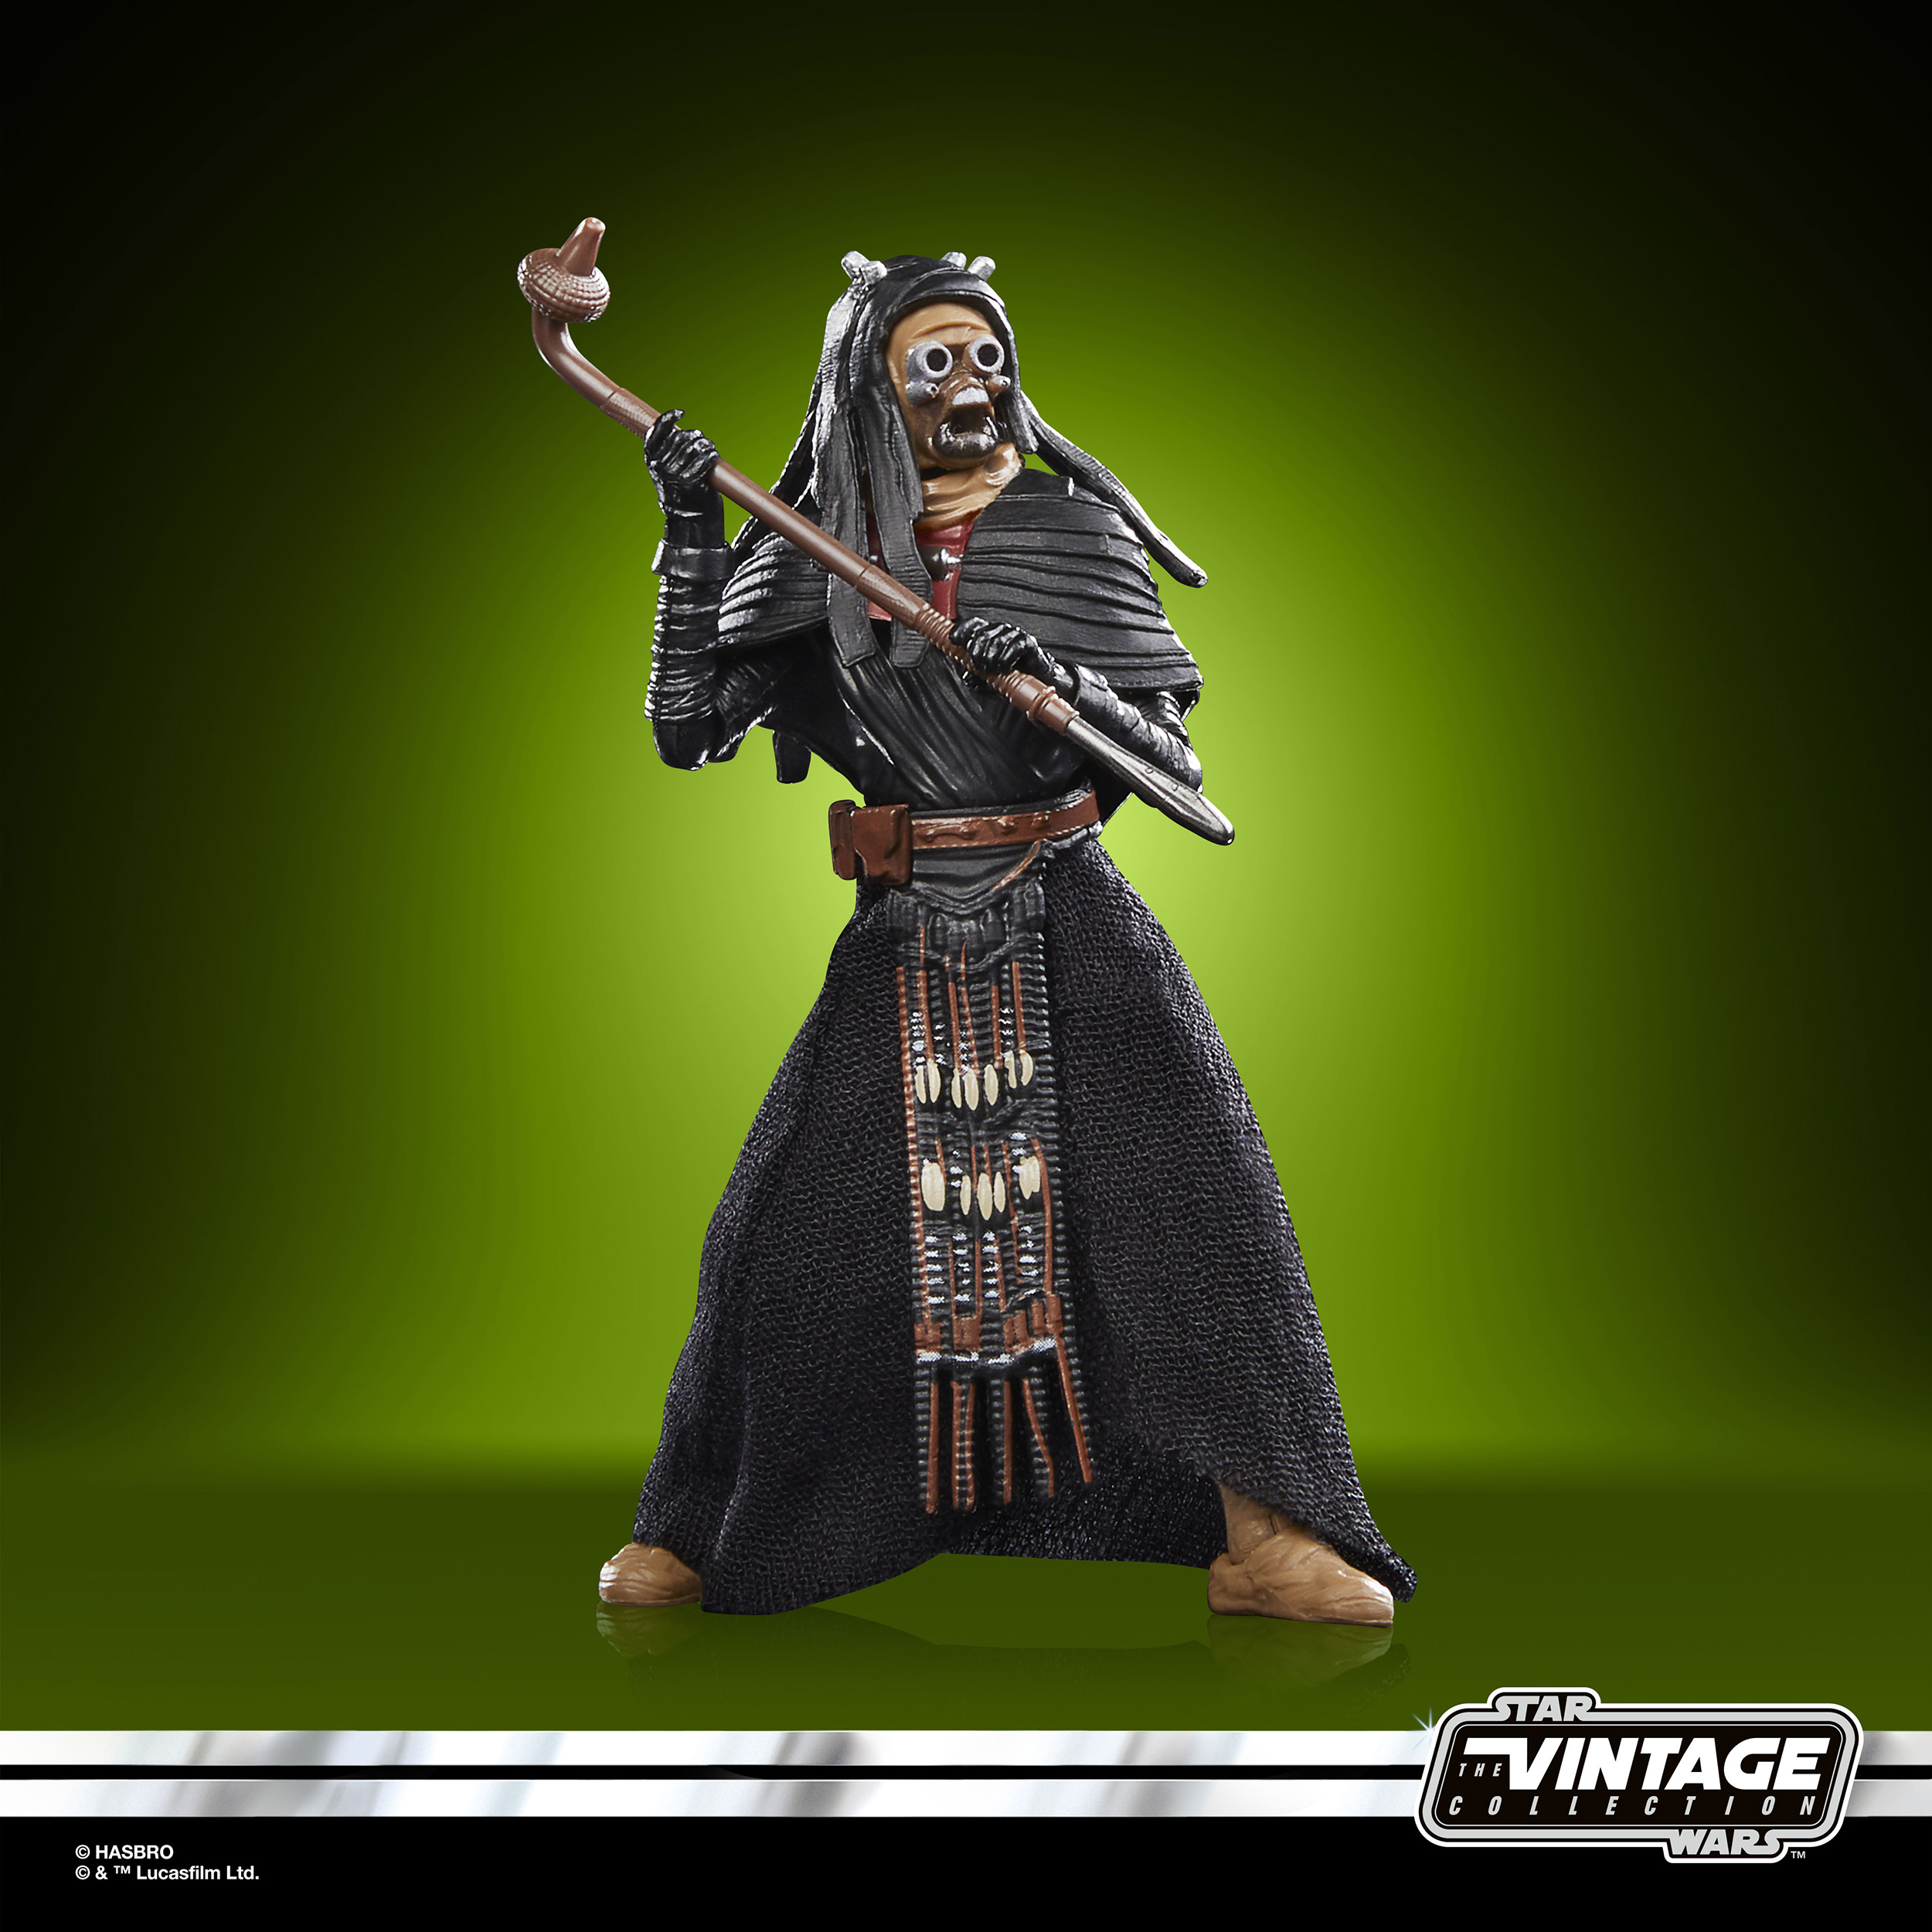 Hasbro Press Release - The Vintage Collection 3.75-Inch Tusken Warrior